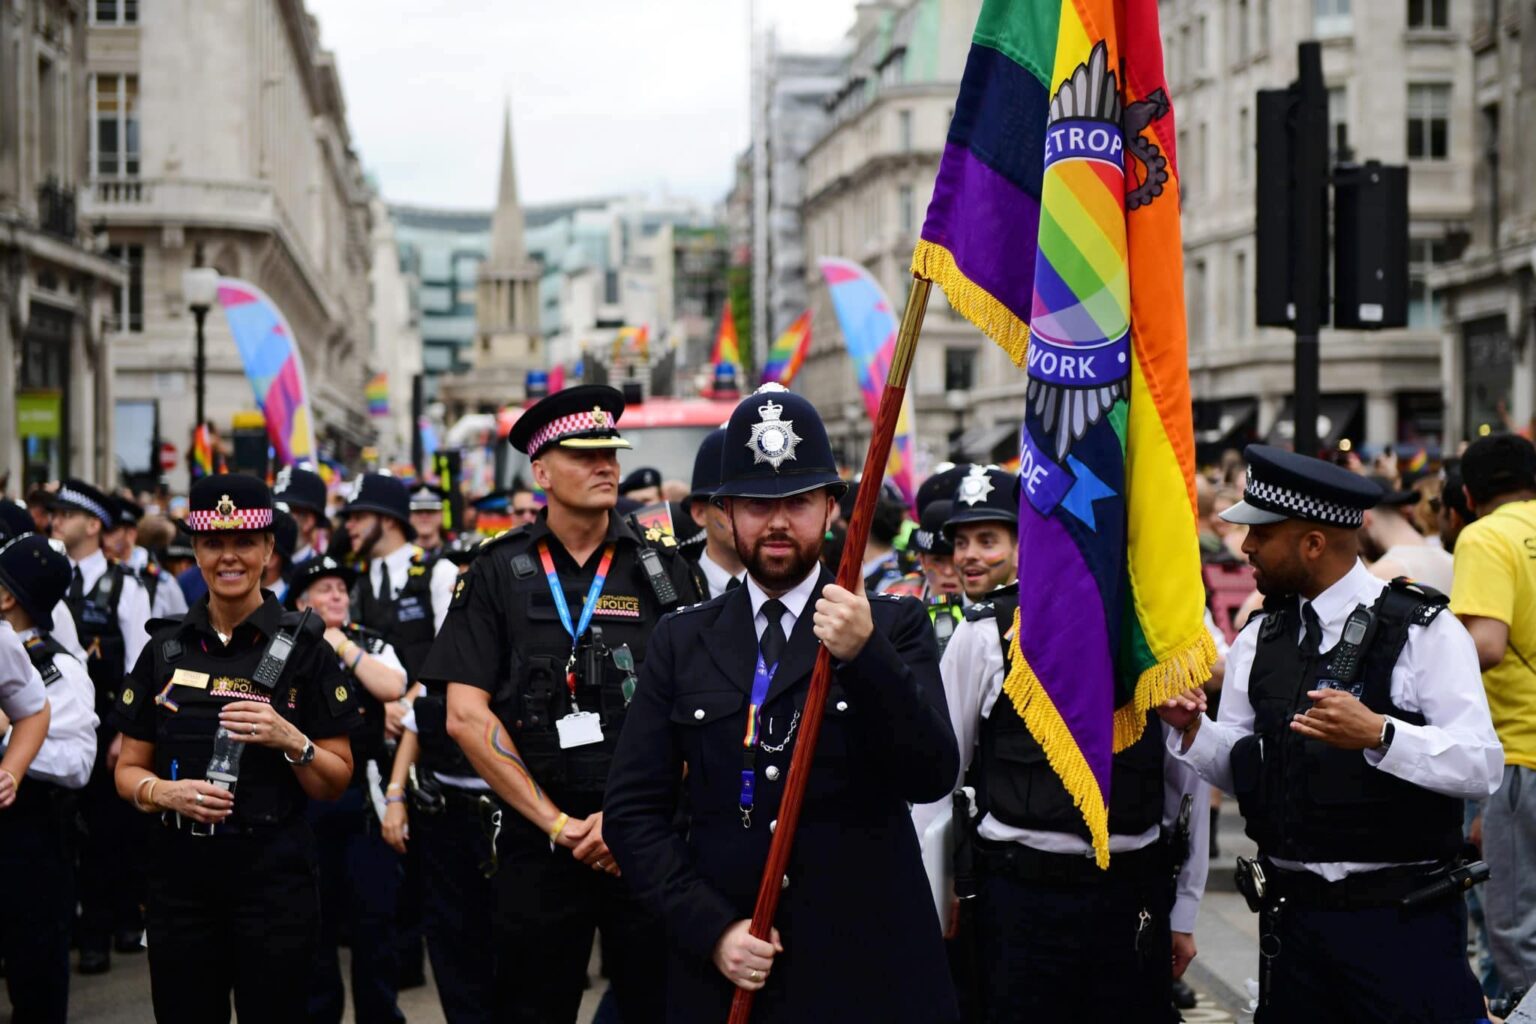 The Metropolitan Police are currently in hot water, as it has just been revealed they might be hiring neo-Nazis. Here’s what we know about the situation.